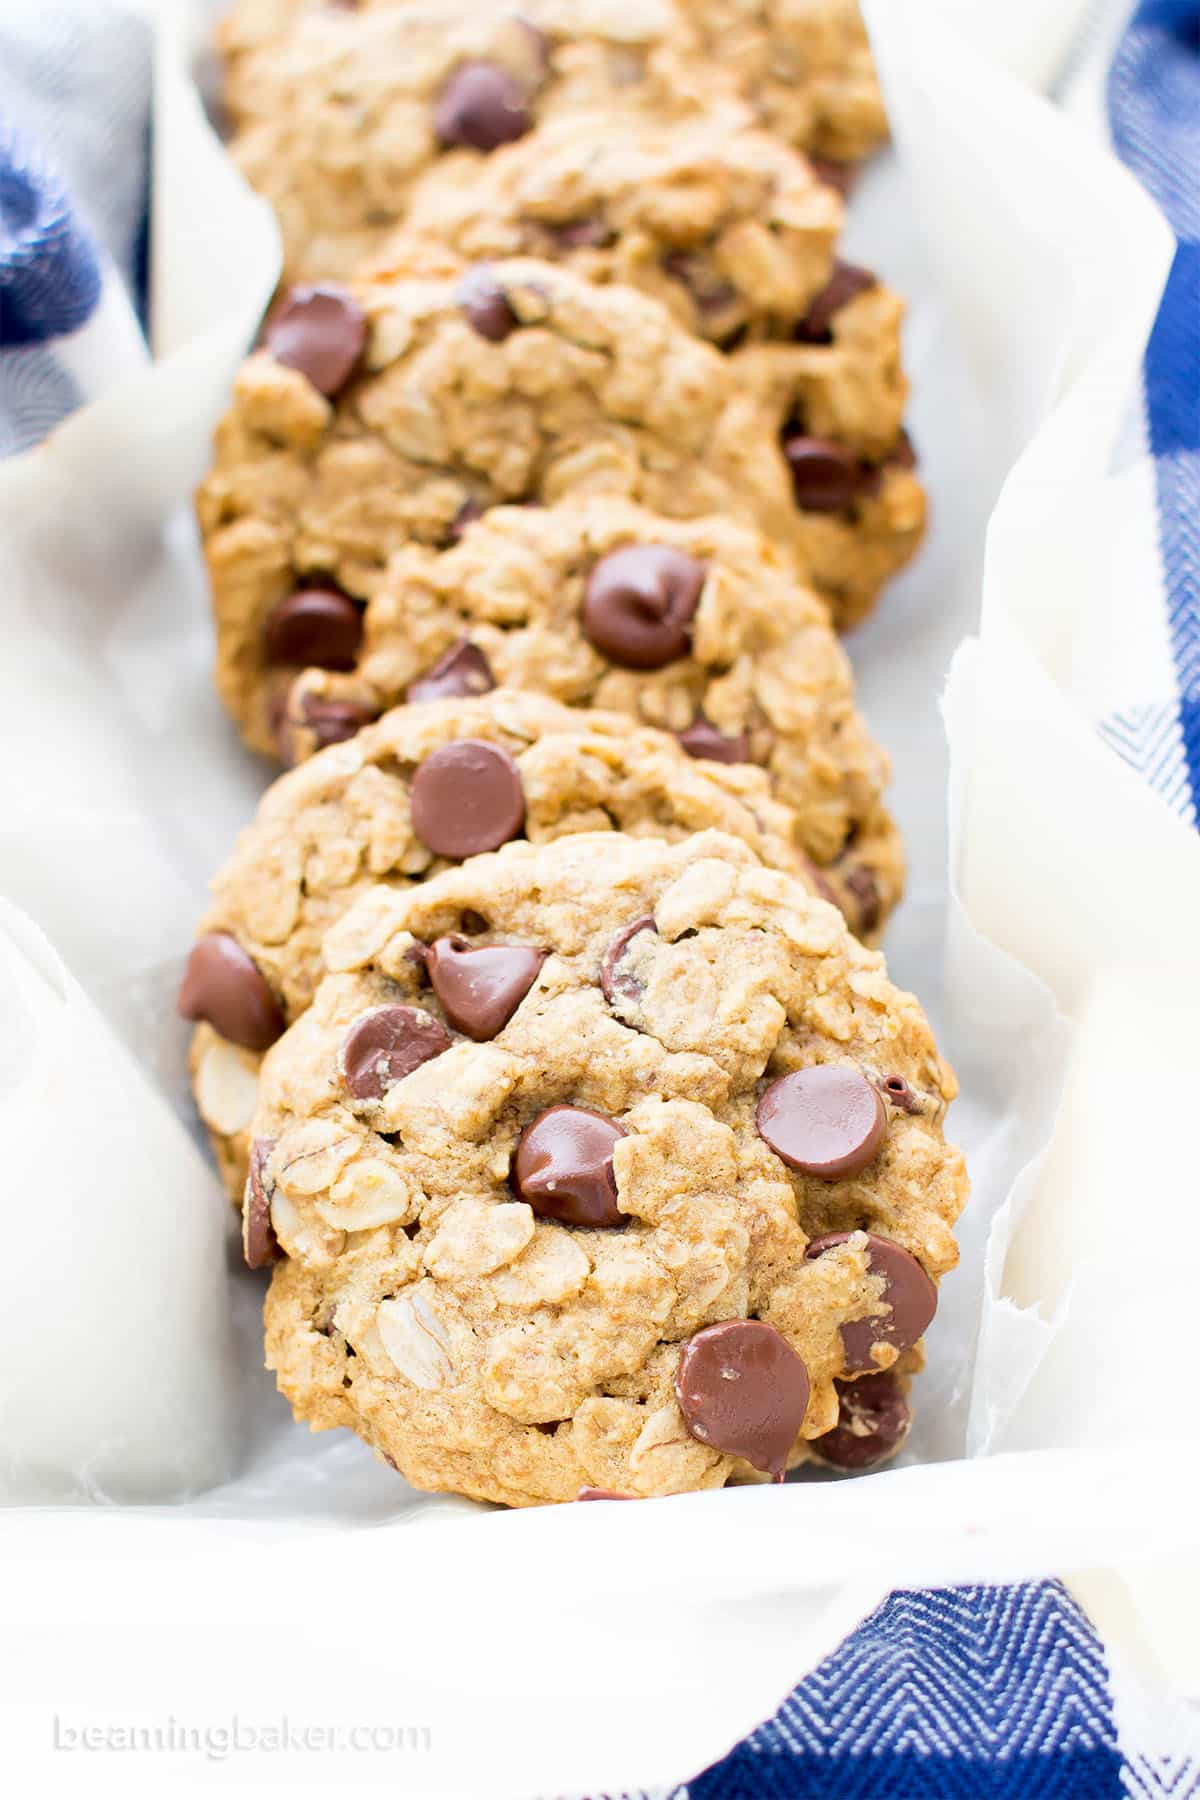 Gluten And Dairy Free Cookie Recipes
 Gluten Free Vegan Oatmeal Chocolate Chip Cookies V GF